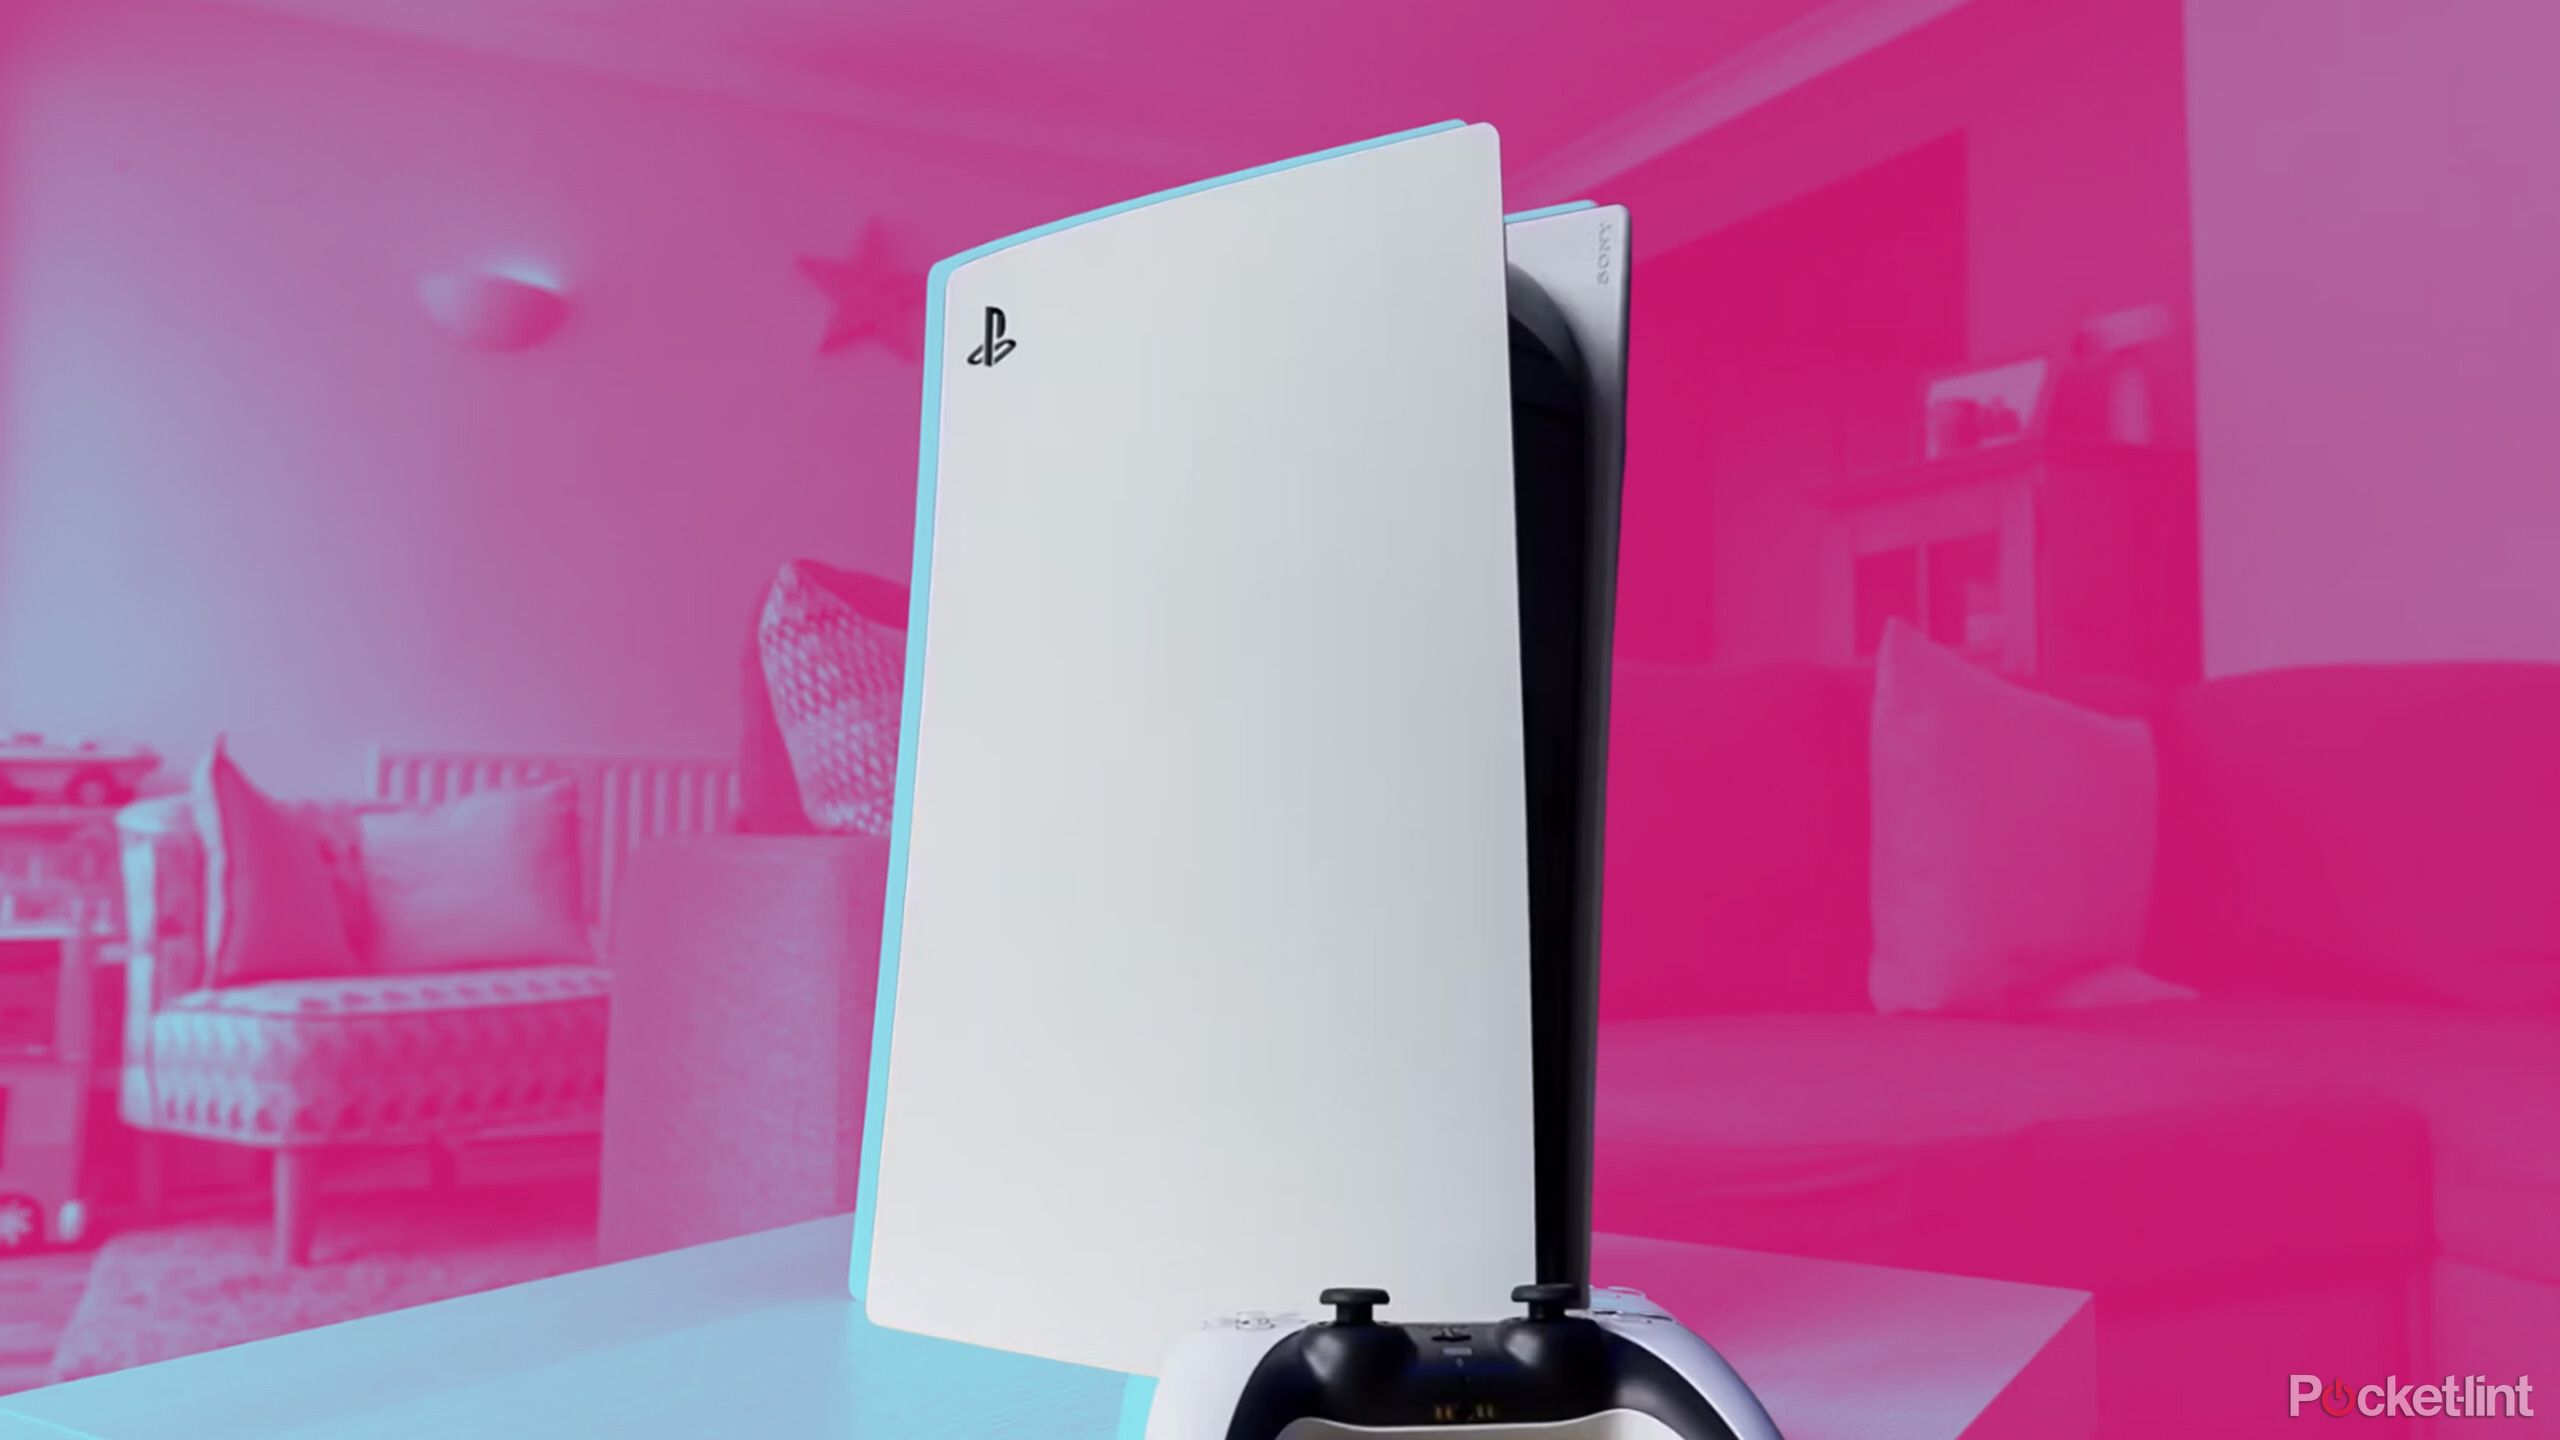 New PS5 update finally makes multiplayer gaming as effortless as it should be